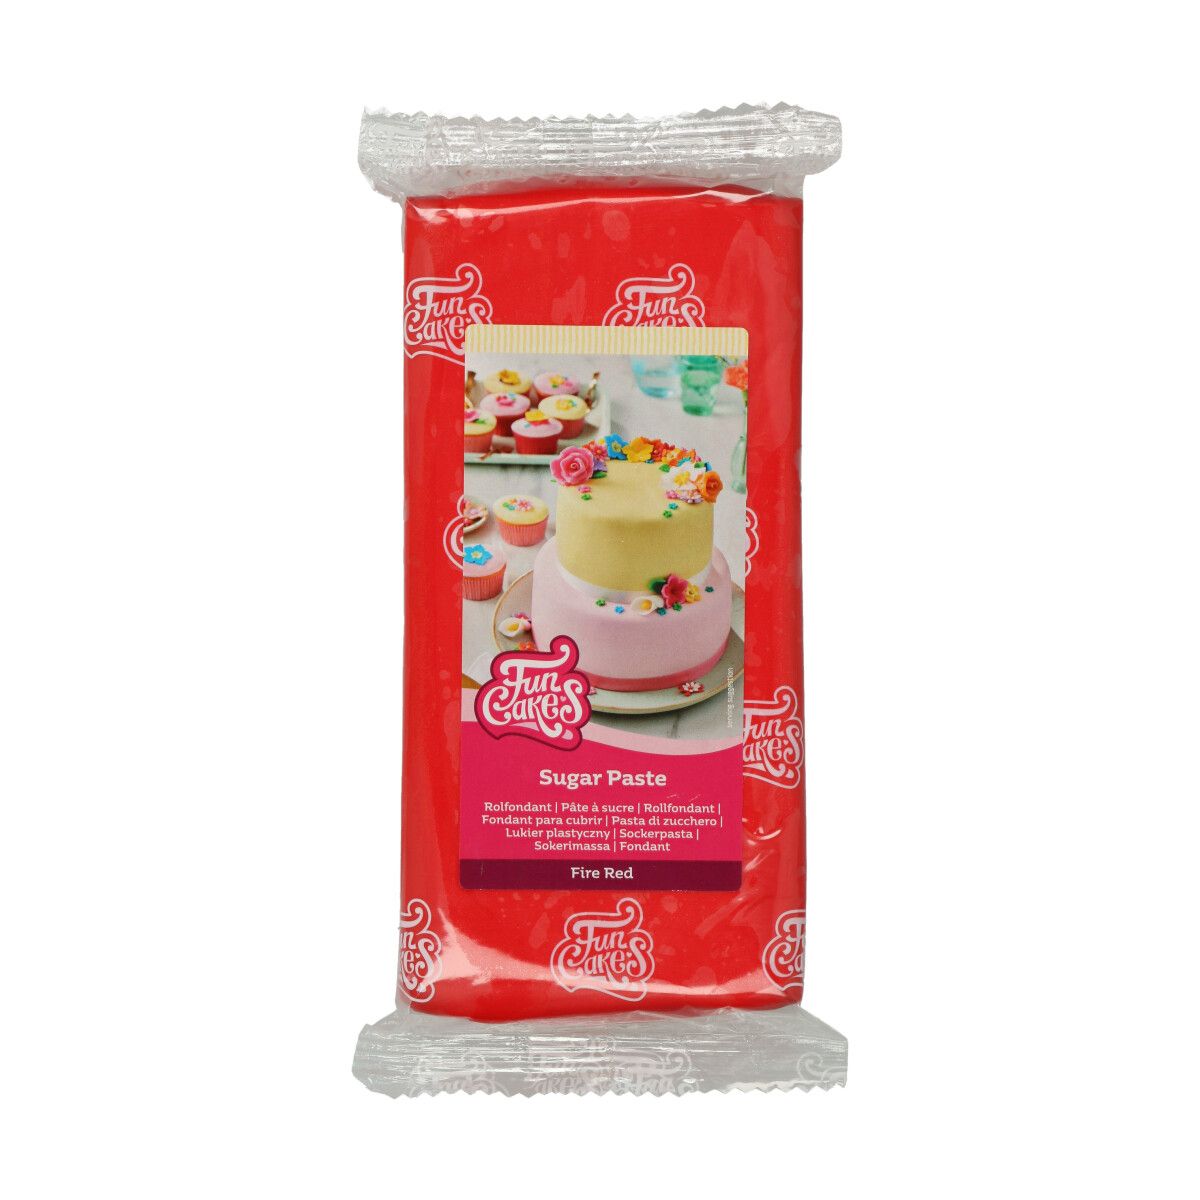 FunCakes - Rolfondant Fire Red 1 kg